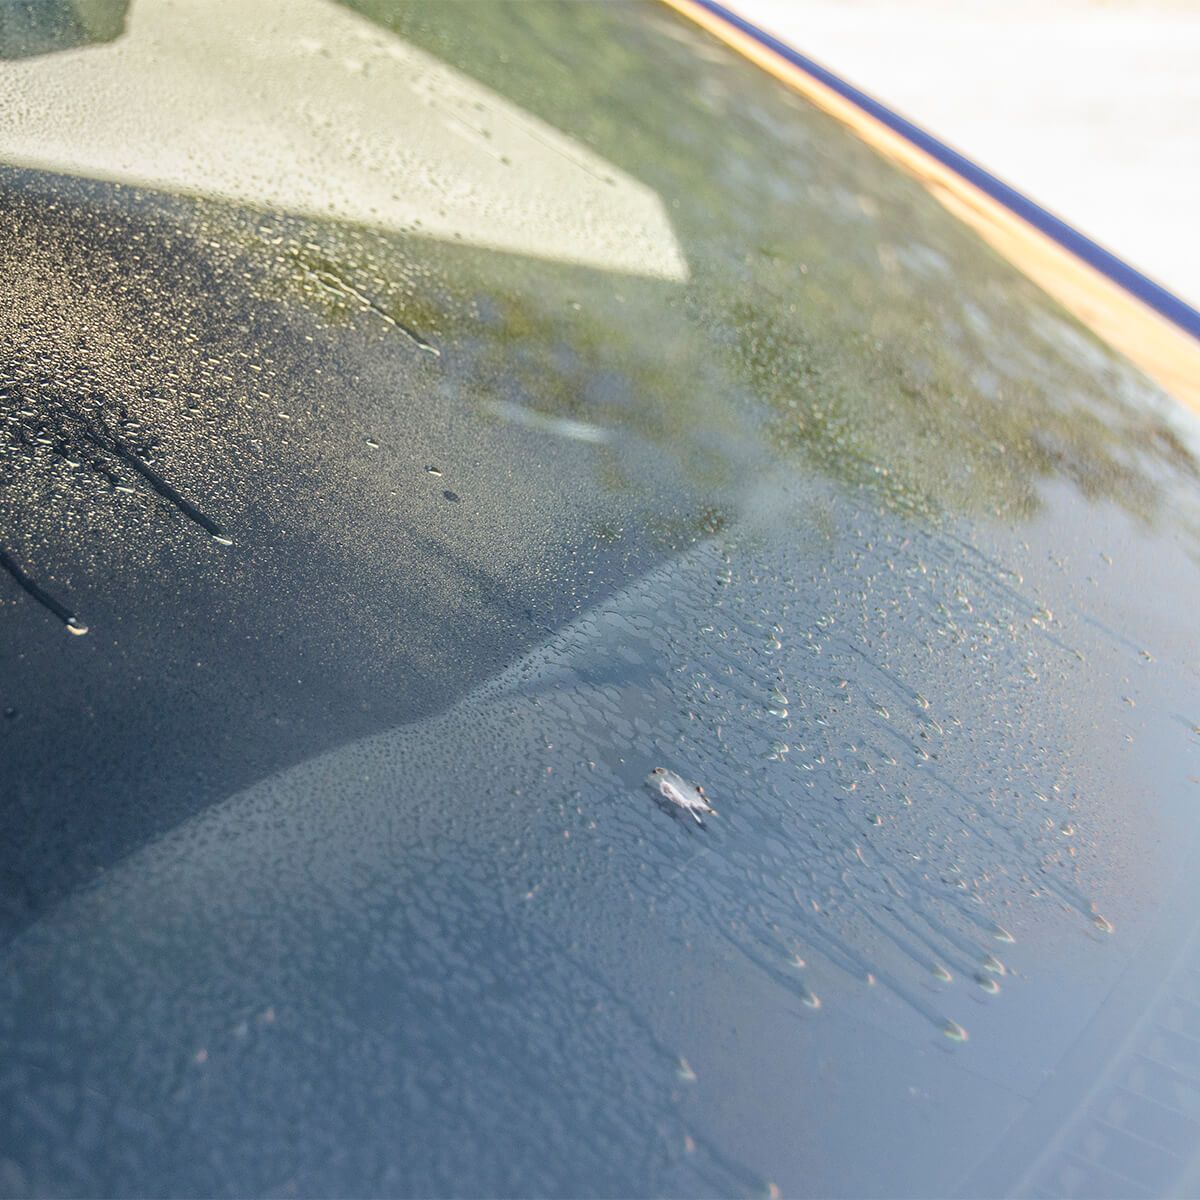 How To Clean Your Car's Windows Inside Without Streaks